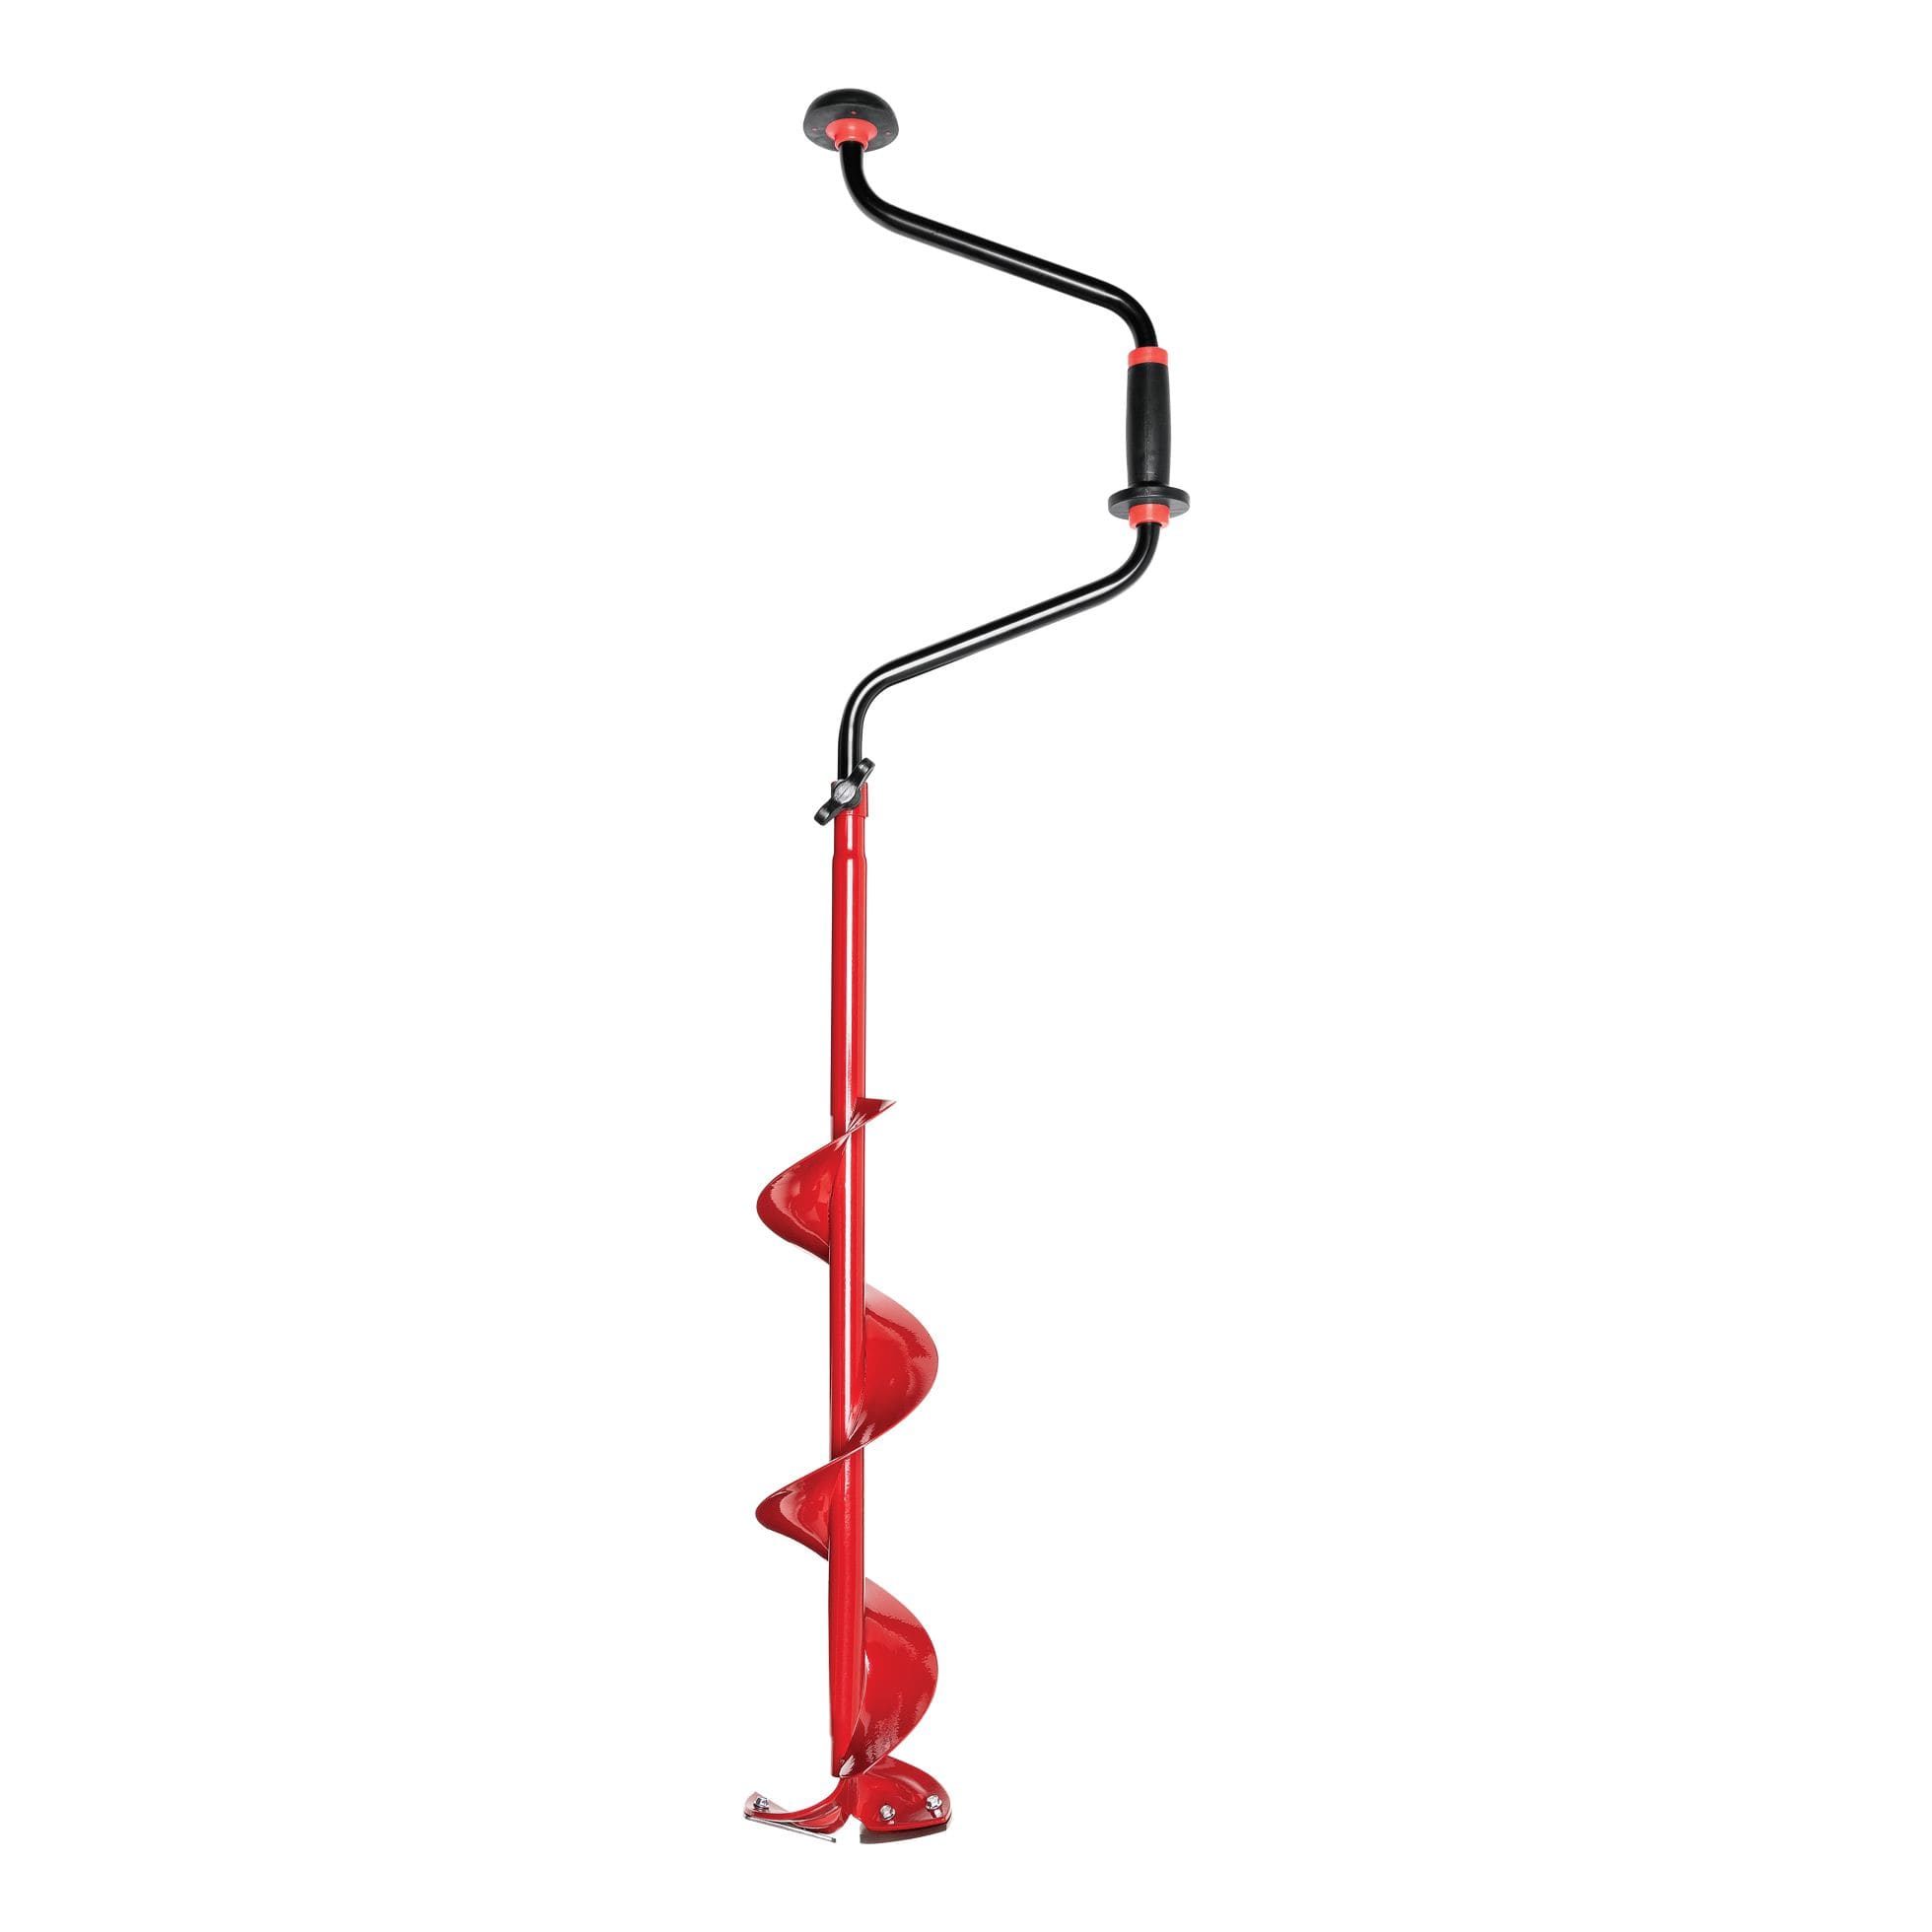 Cabela's Hand Ice Auger